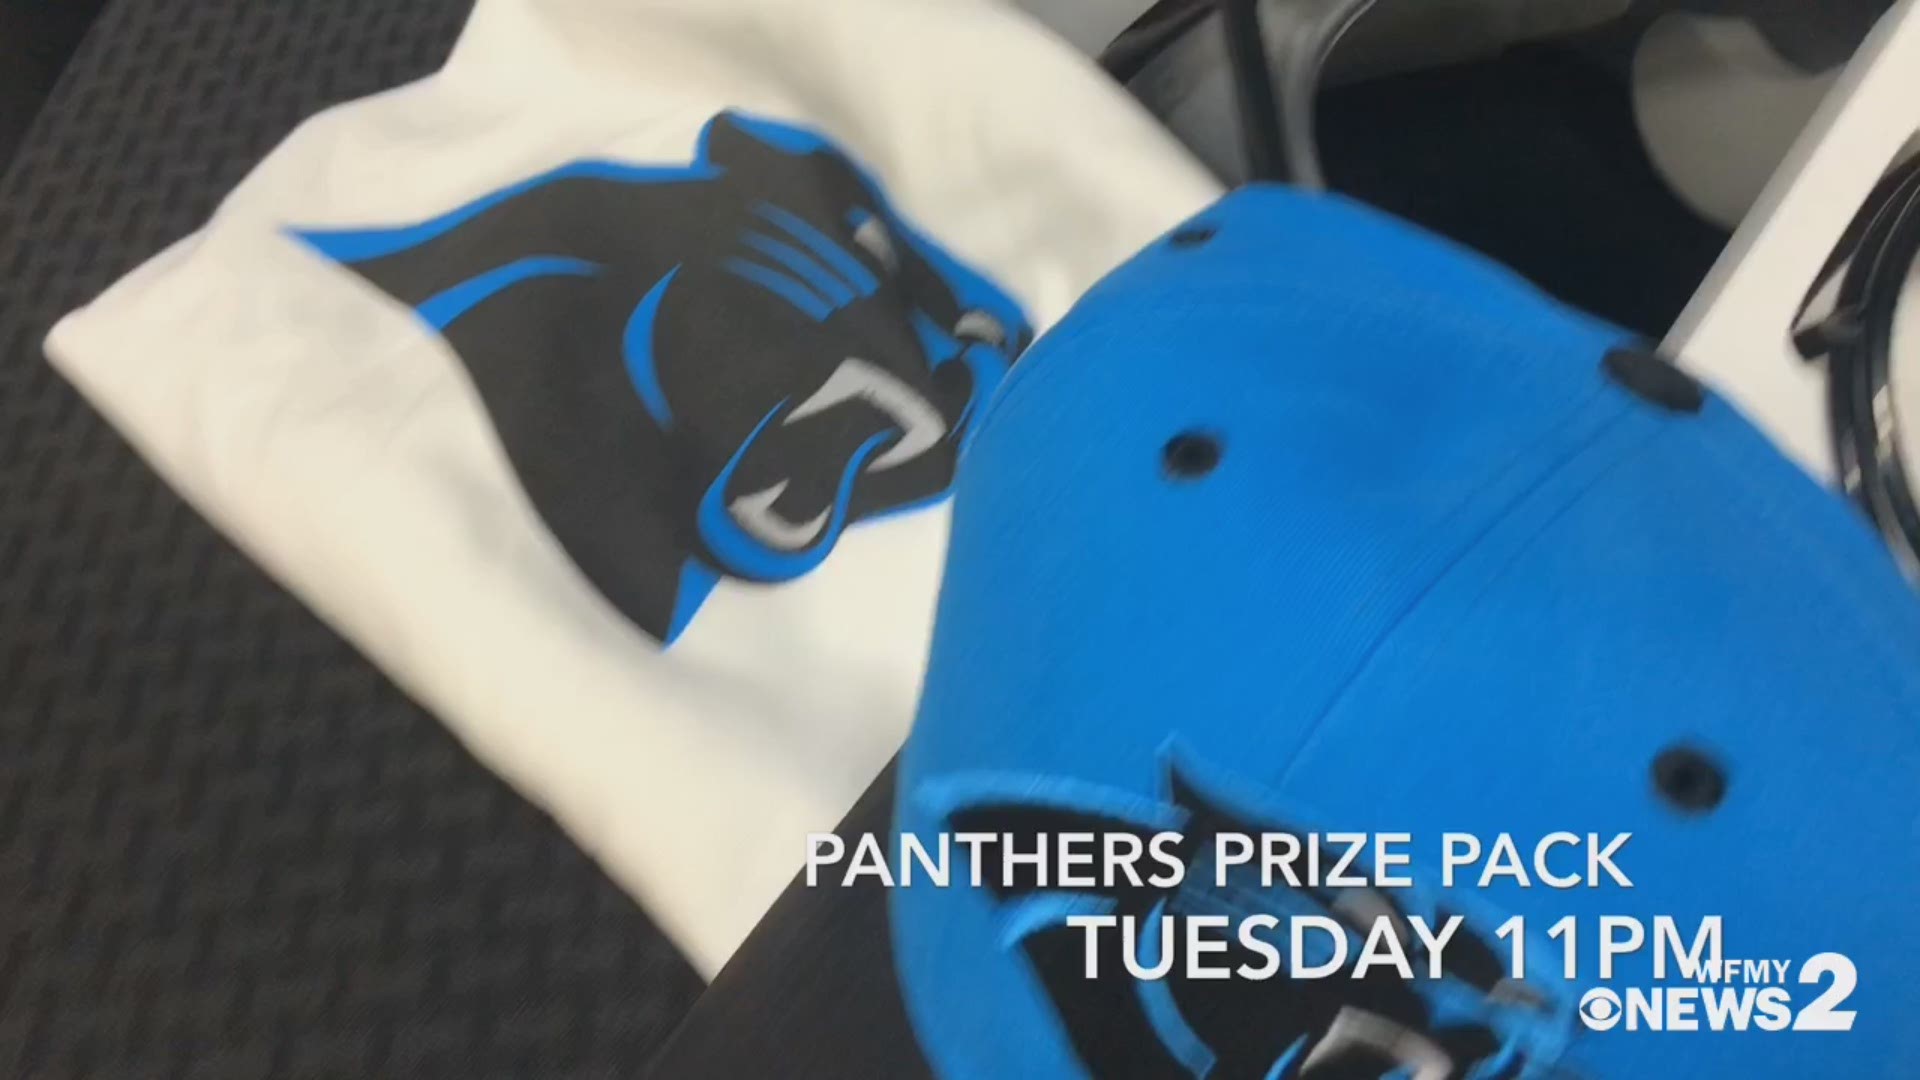 Autographed Panthers gear part of Tuesday's Panthers Prize Pack. One call... wins it all. WFMY News 2 @ 11 Tuesday.